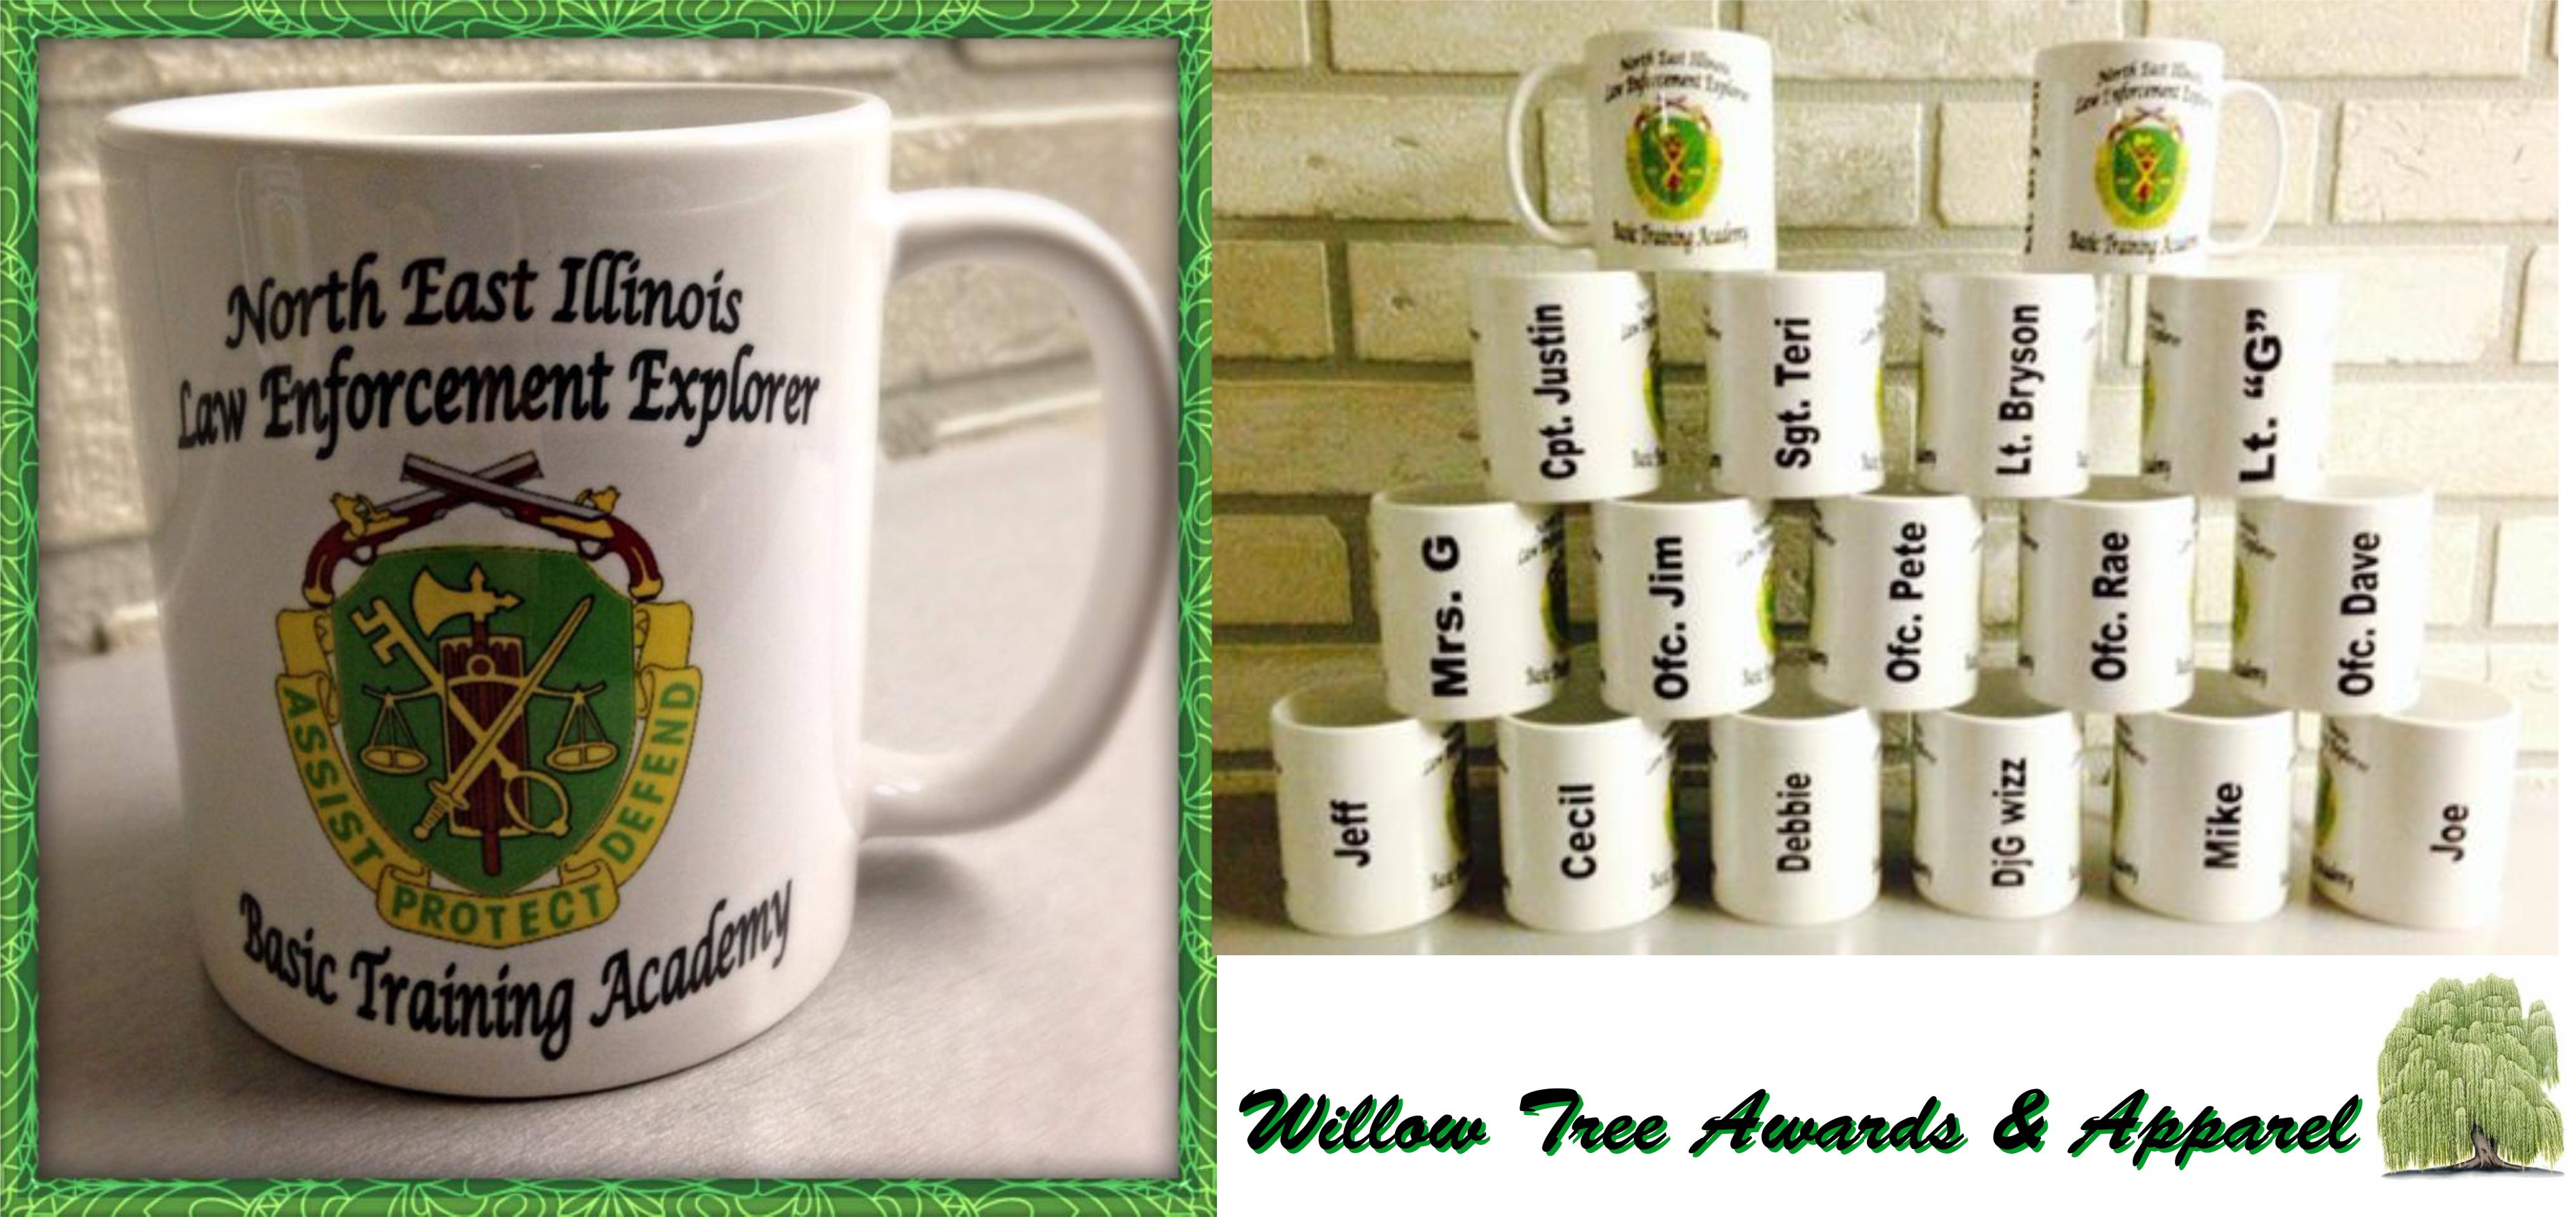 Personalized Mugs made with sublimation printing